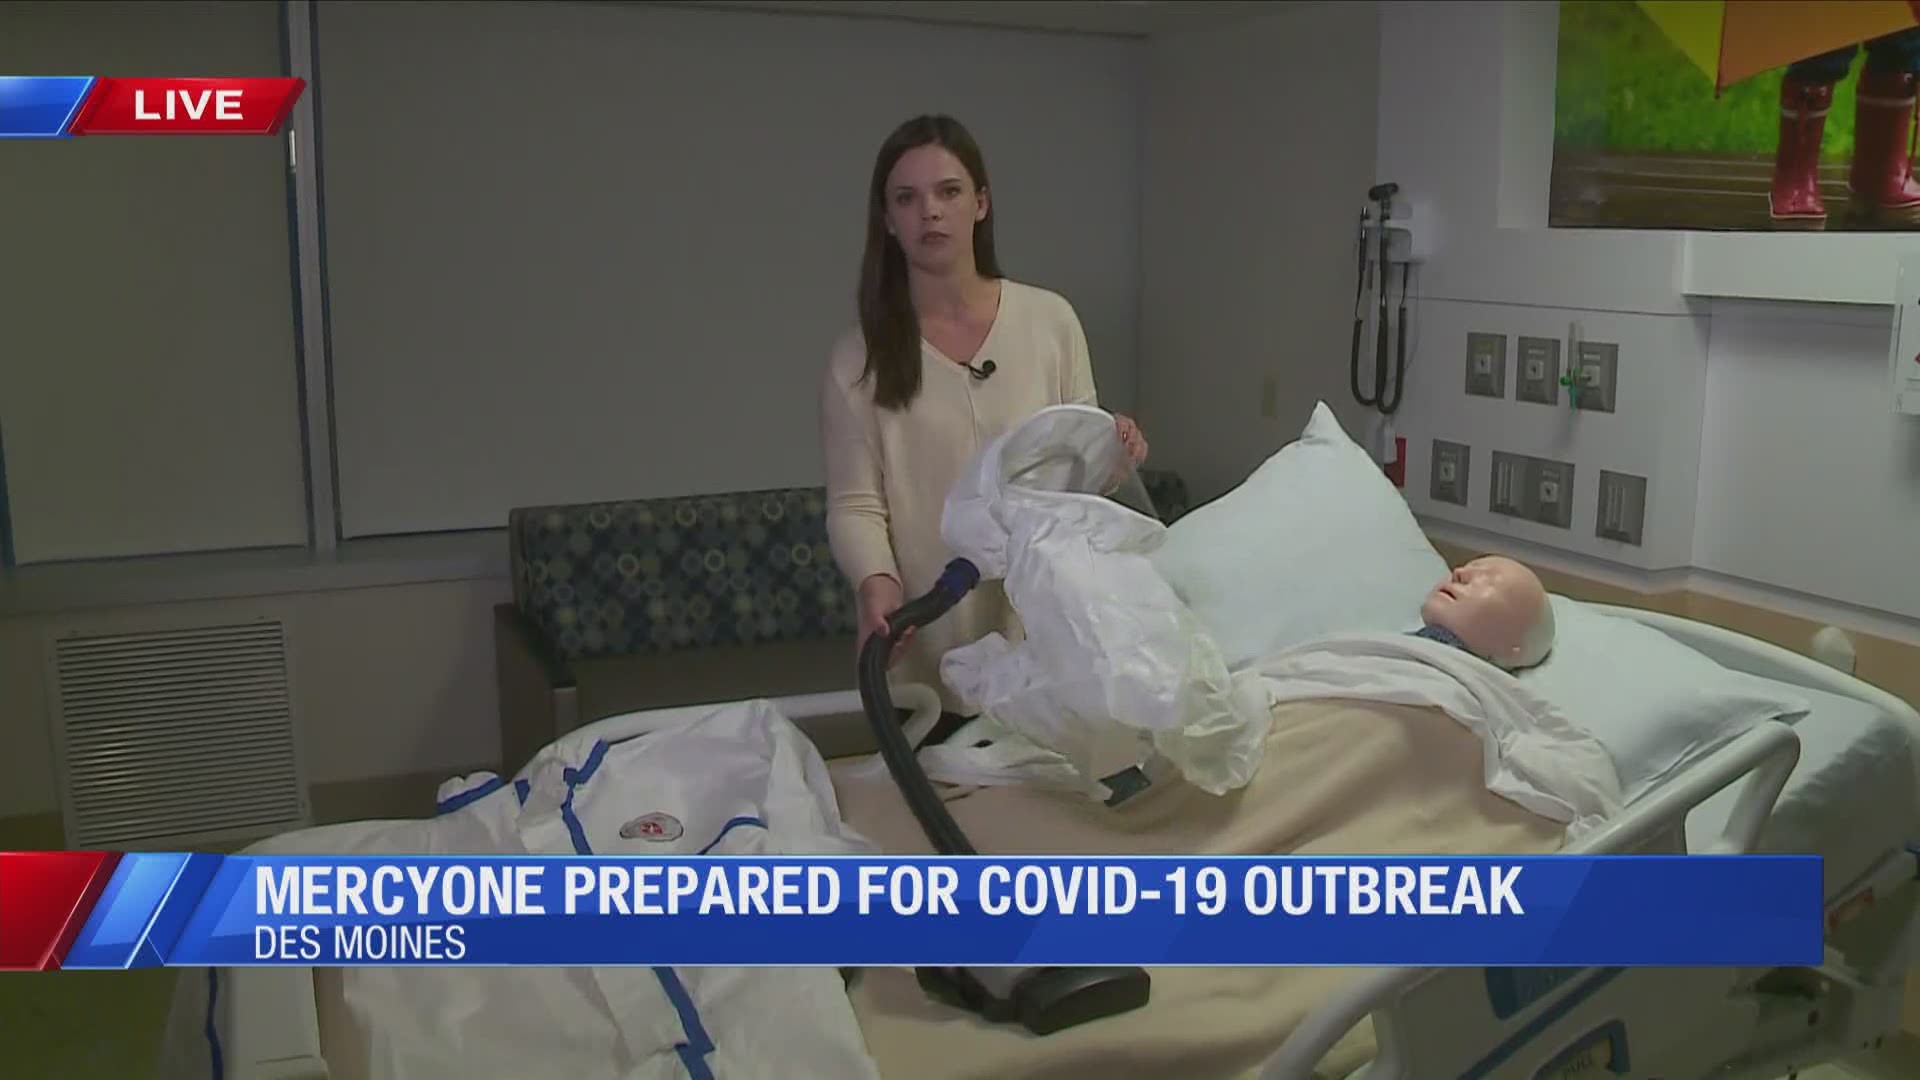 As the coronavirus spreads across the world, Iowa gets ready to handle any possible outbreaks that happen locally.